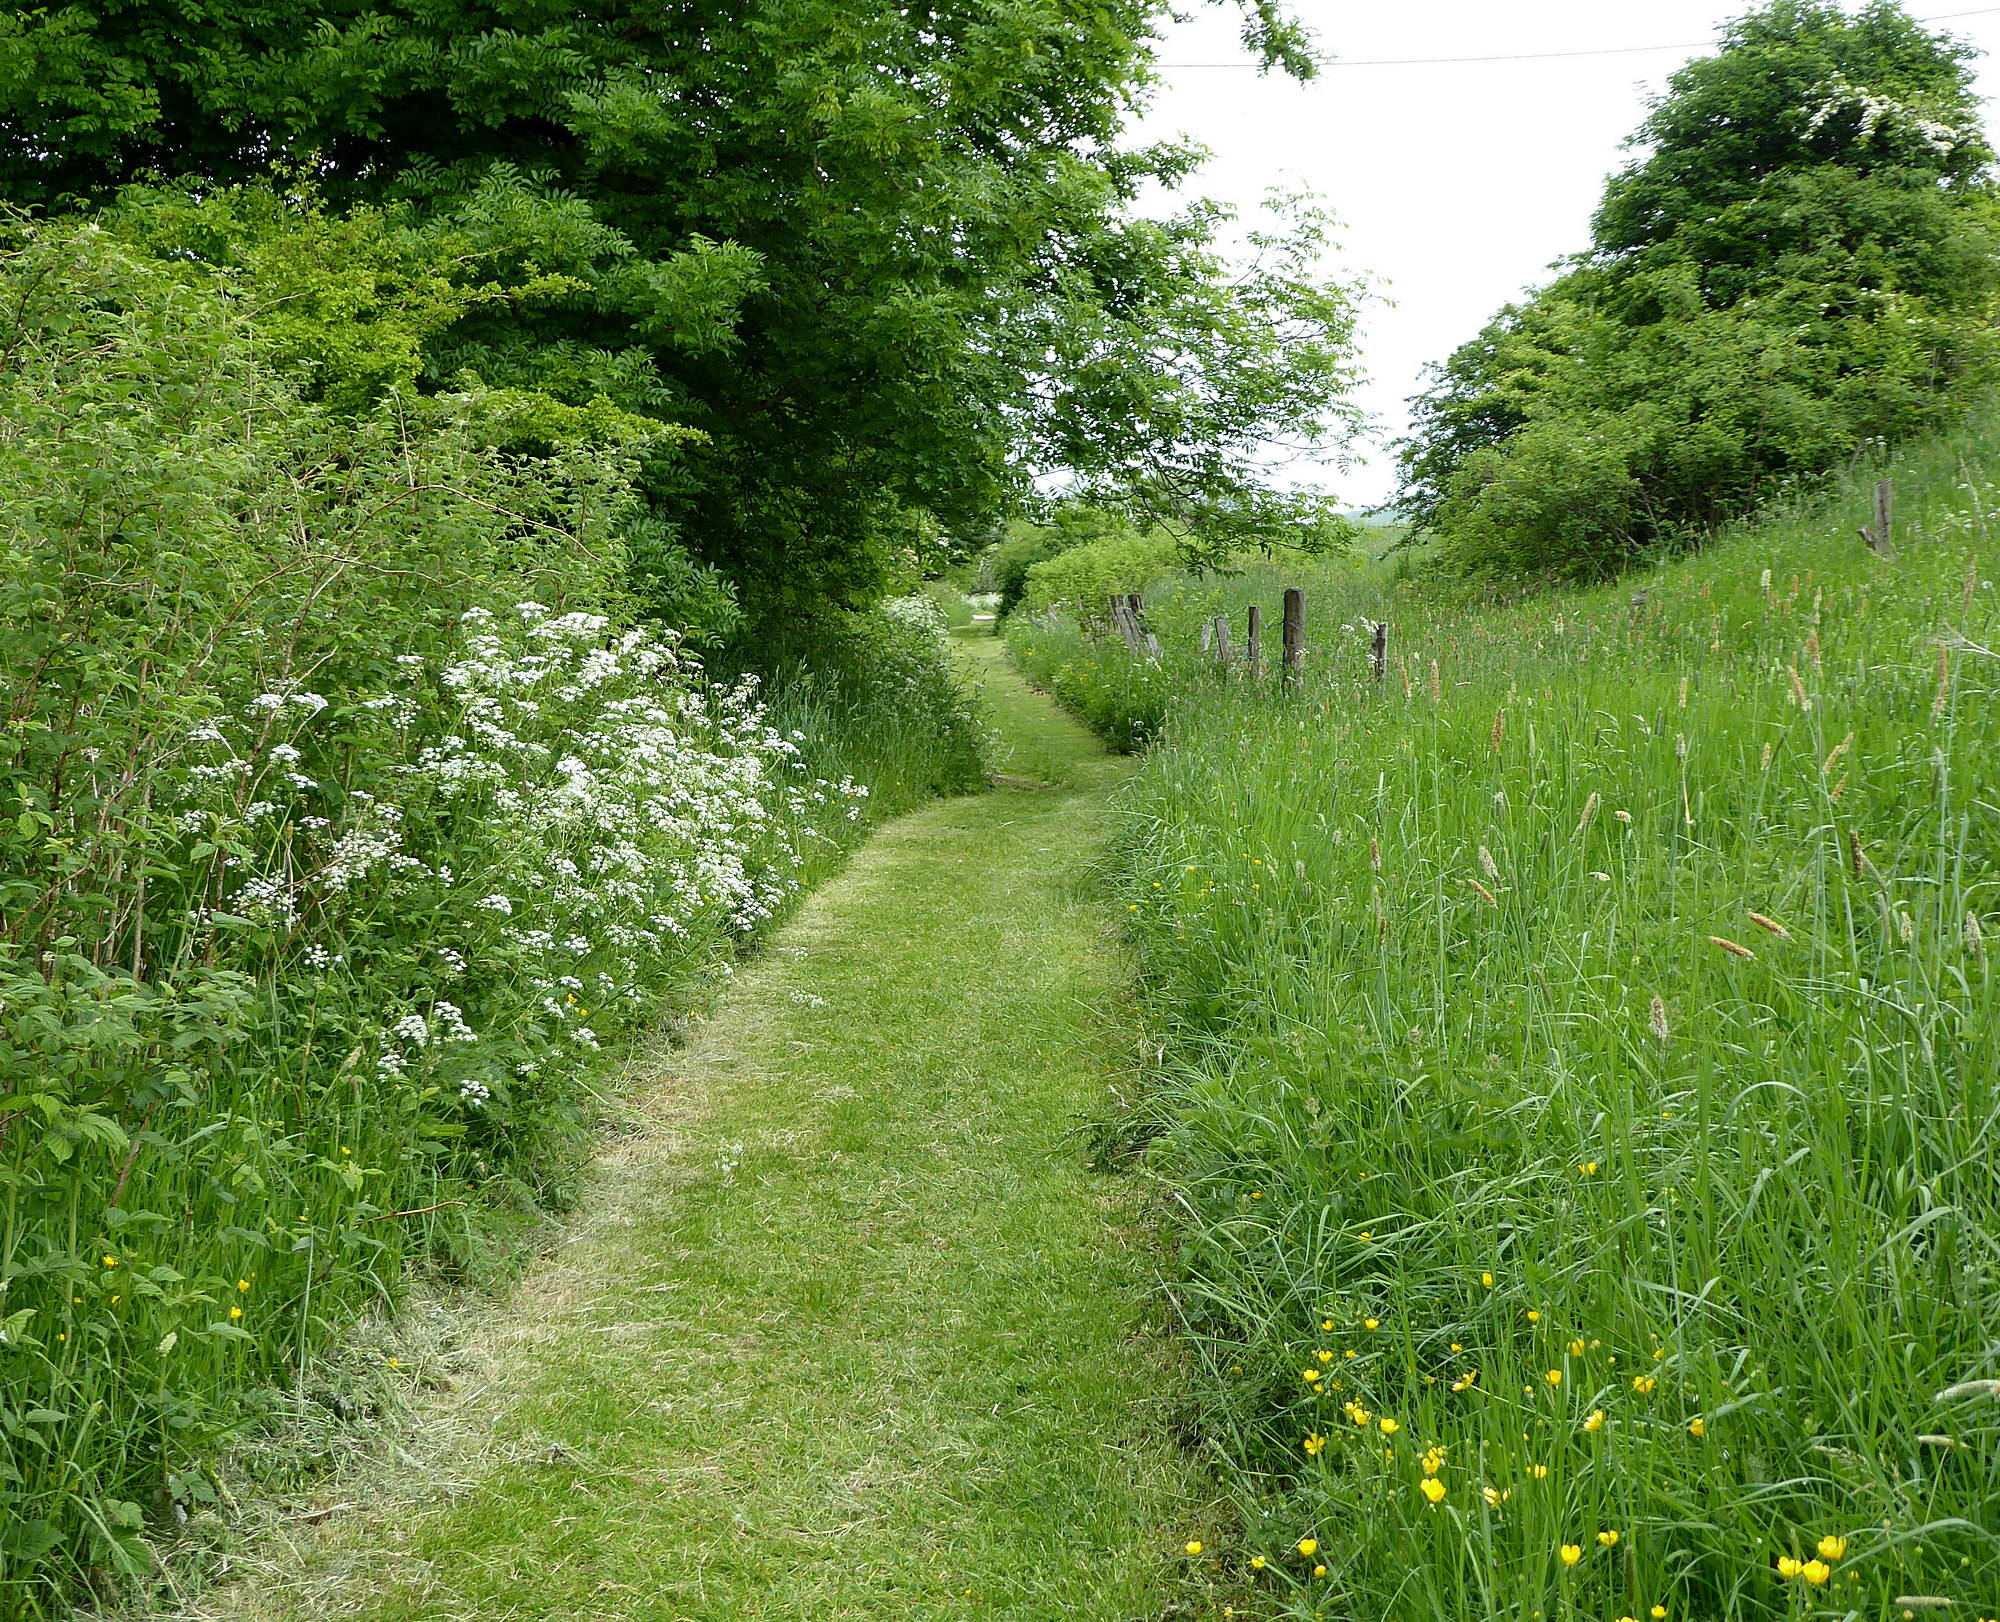 Return by old railway path (Well manicured!). 8th June 2018